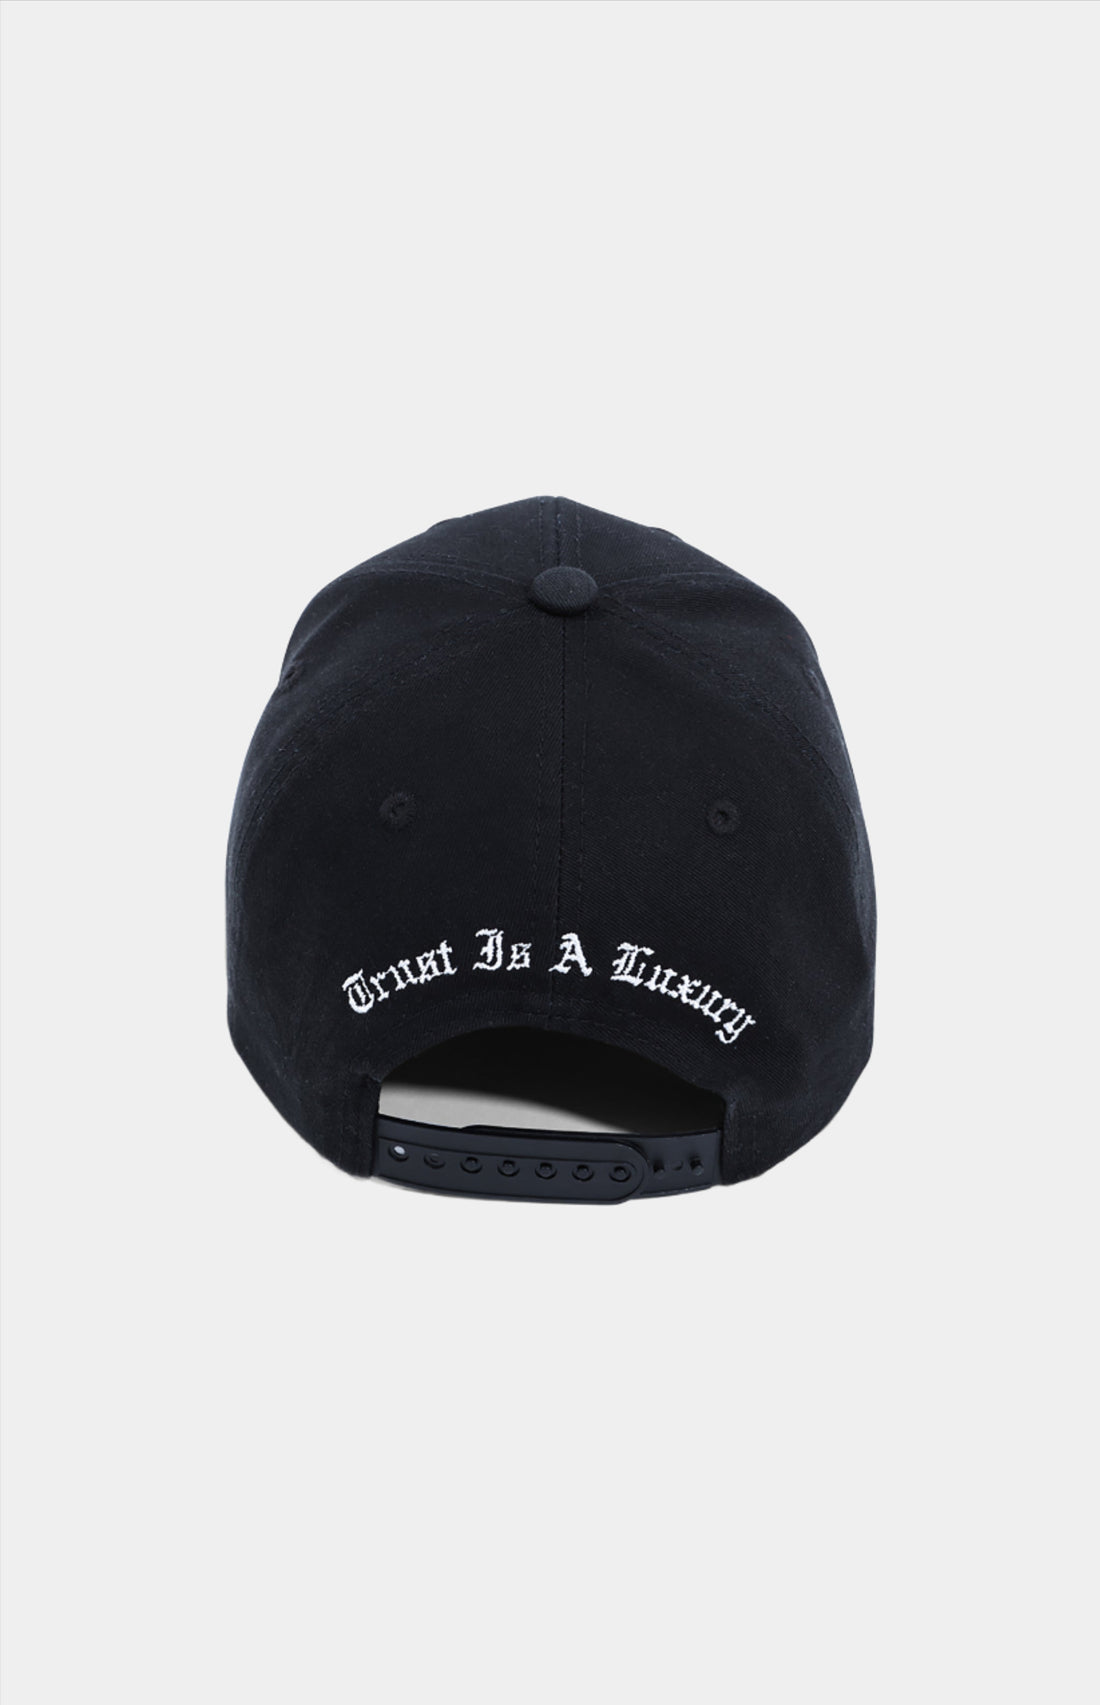 Upgrade Your Style Game with Our Sophisticated Black Baseball Cap - Expertly Crafted in Portugal with Bold White Stitching and High-Quality Materials for Durability and Longevity. Easy to Care for, Simply Machine Wash and Hang to Dry. A Must-Have Fashion Accessory for Any Stylish and Discerning Individual.